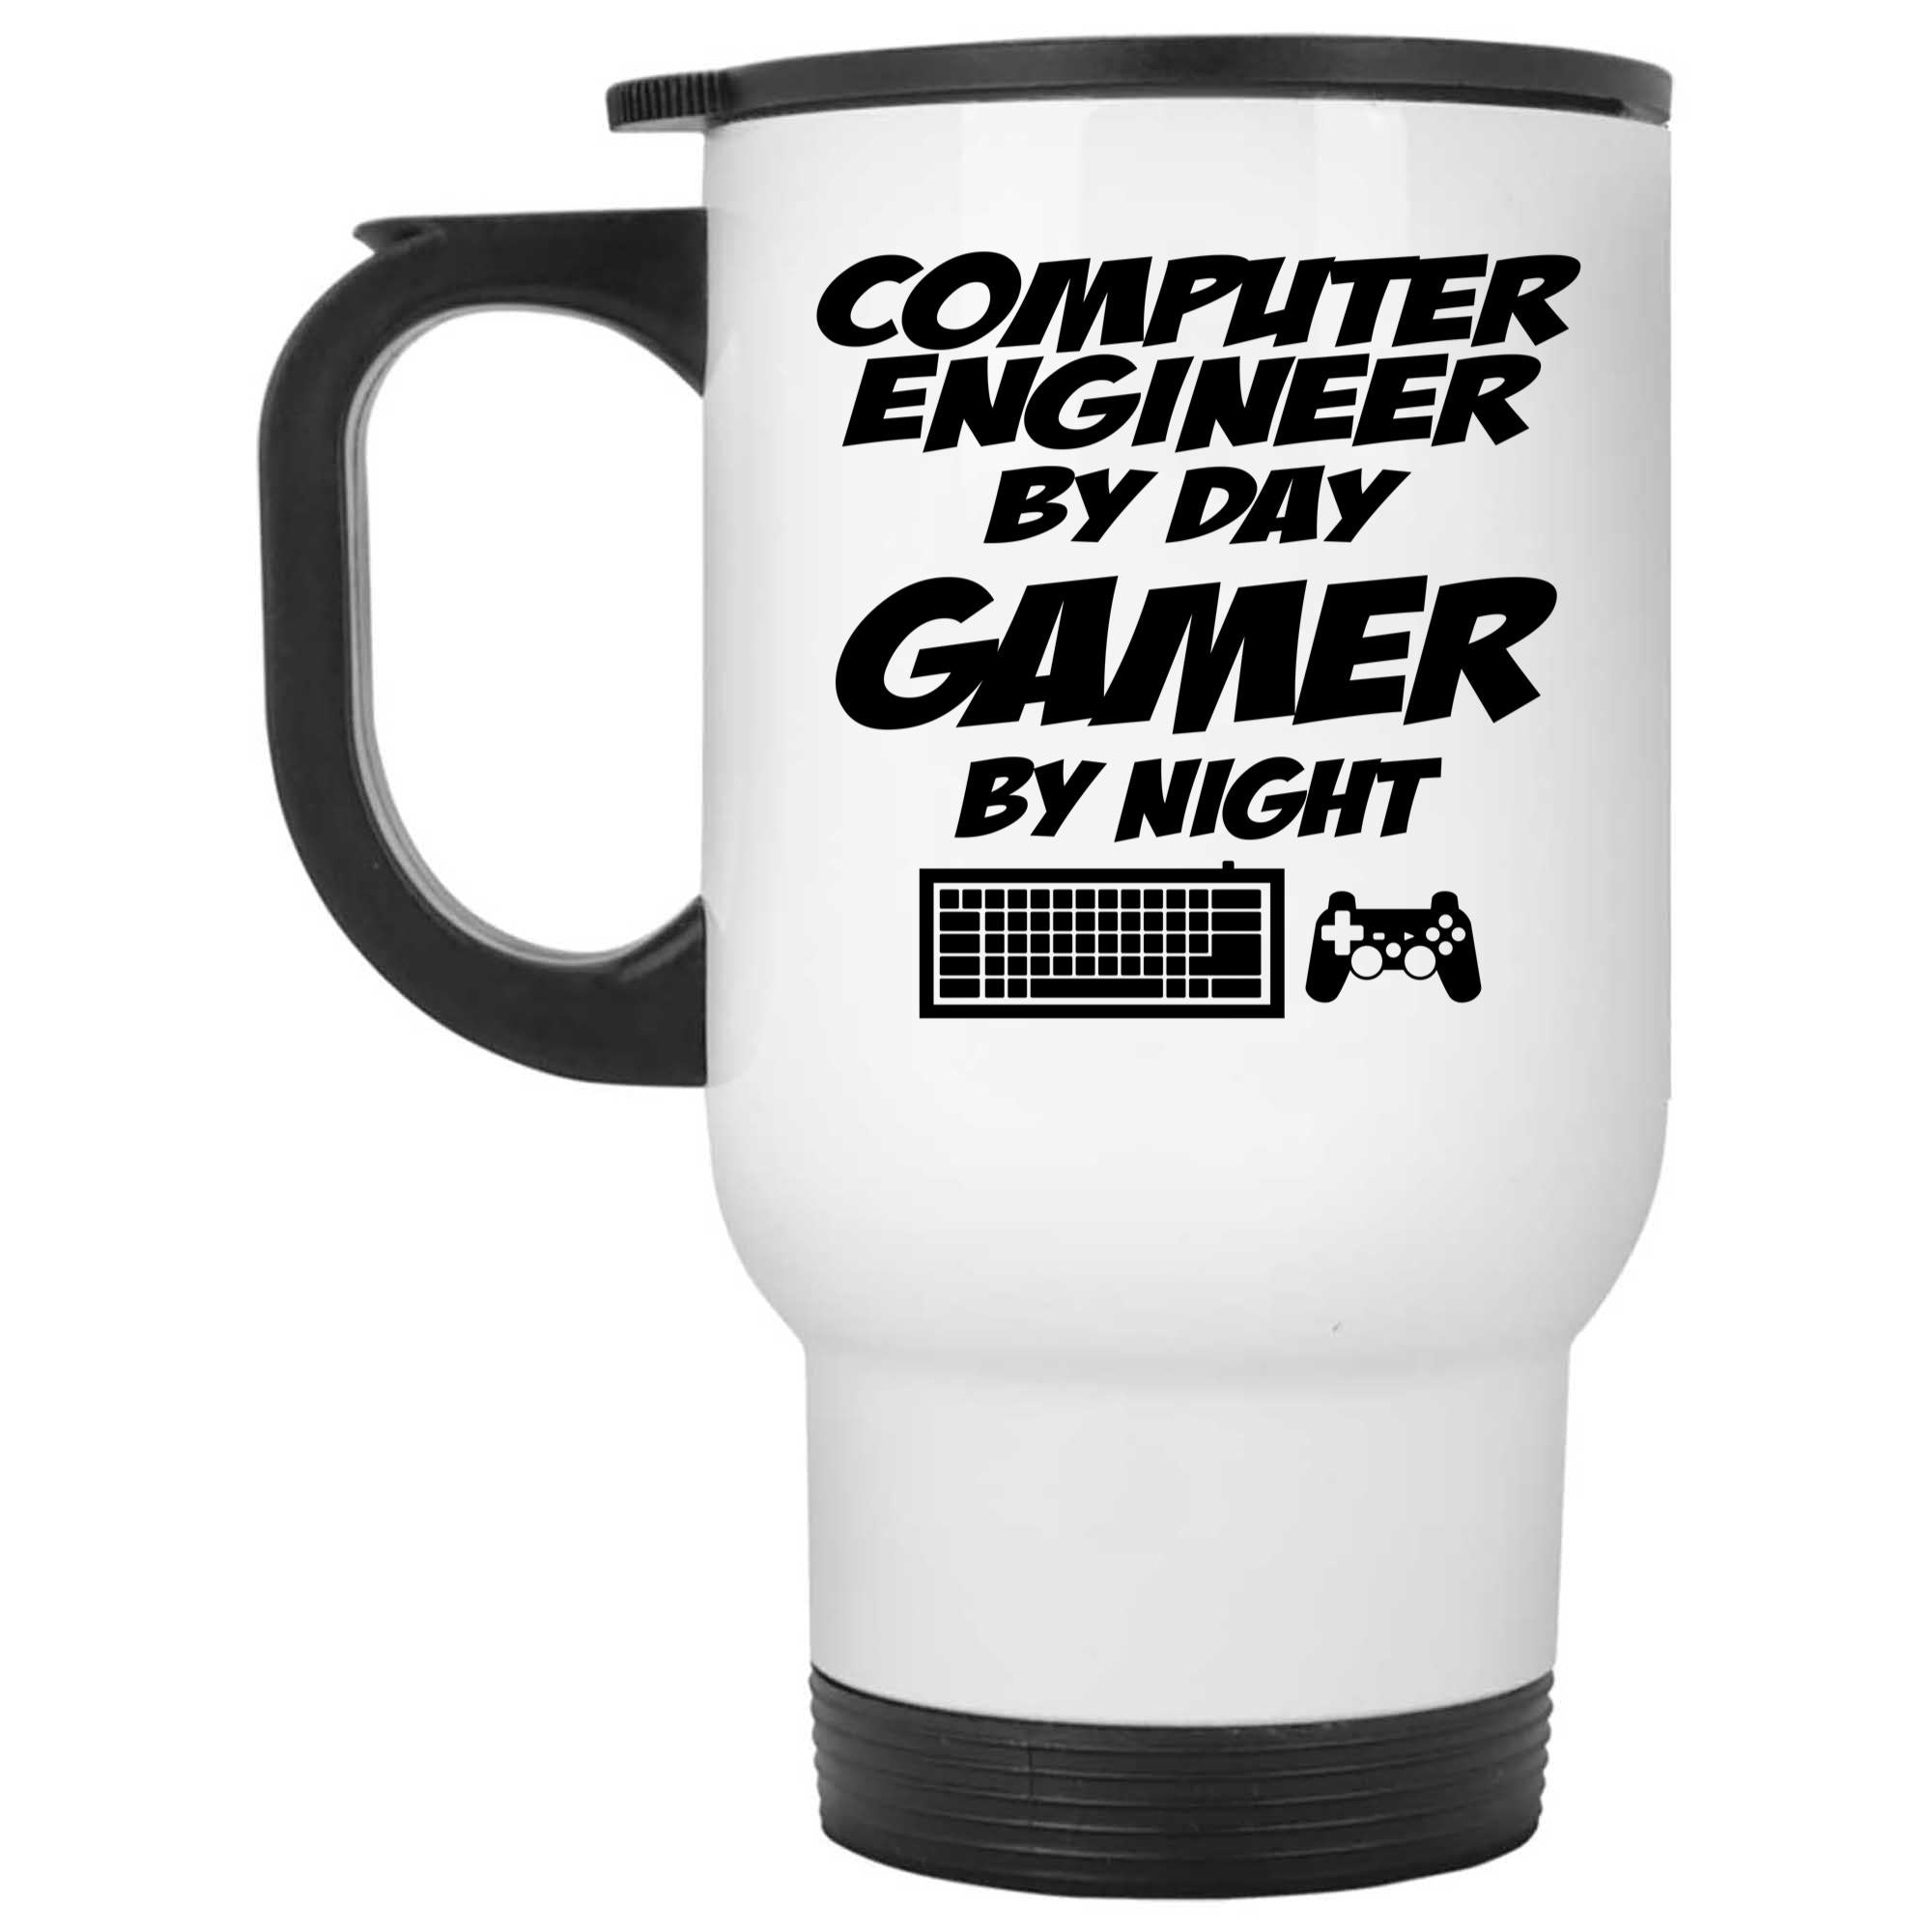 Skitongifts Funny Ceramic Novelty Coffee Mug Computer Engineer By Day Gamer By Night 67ImCZD